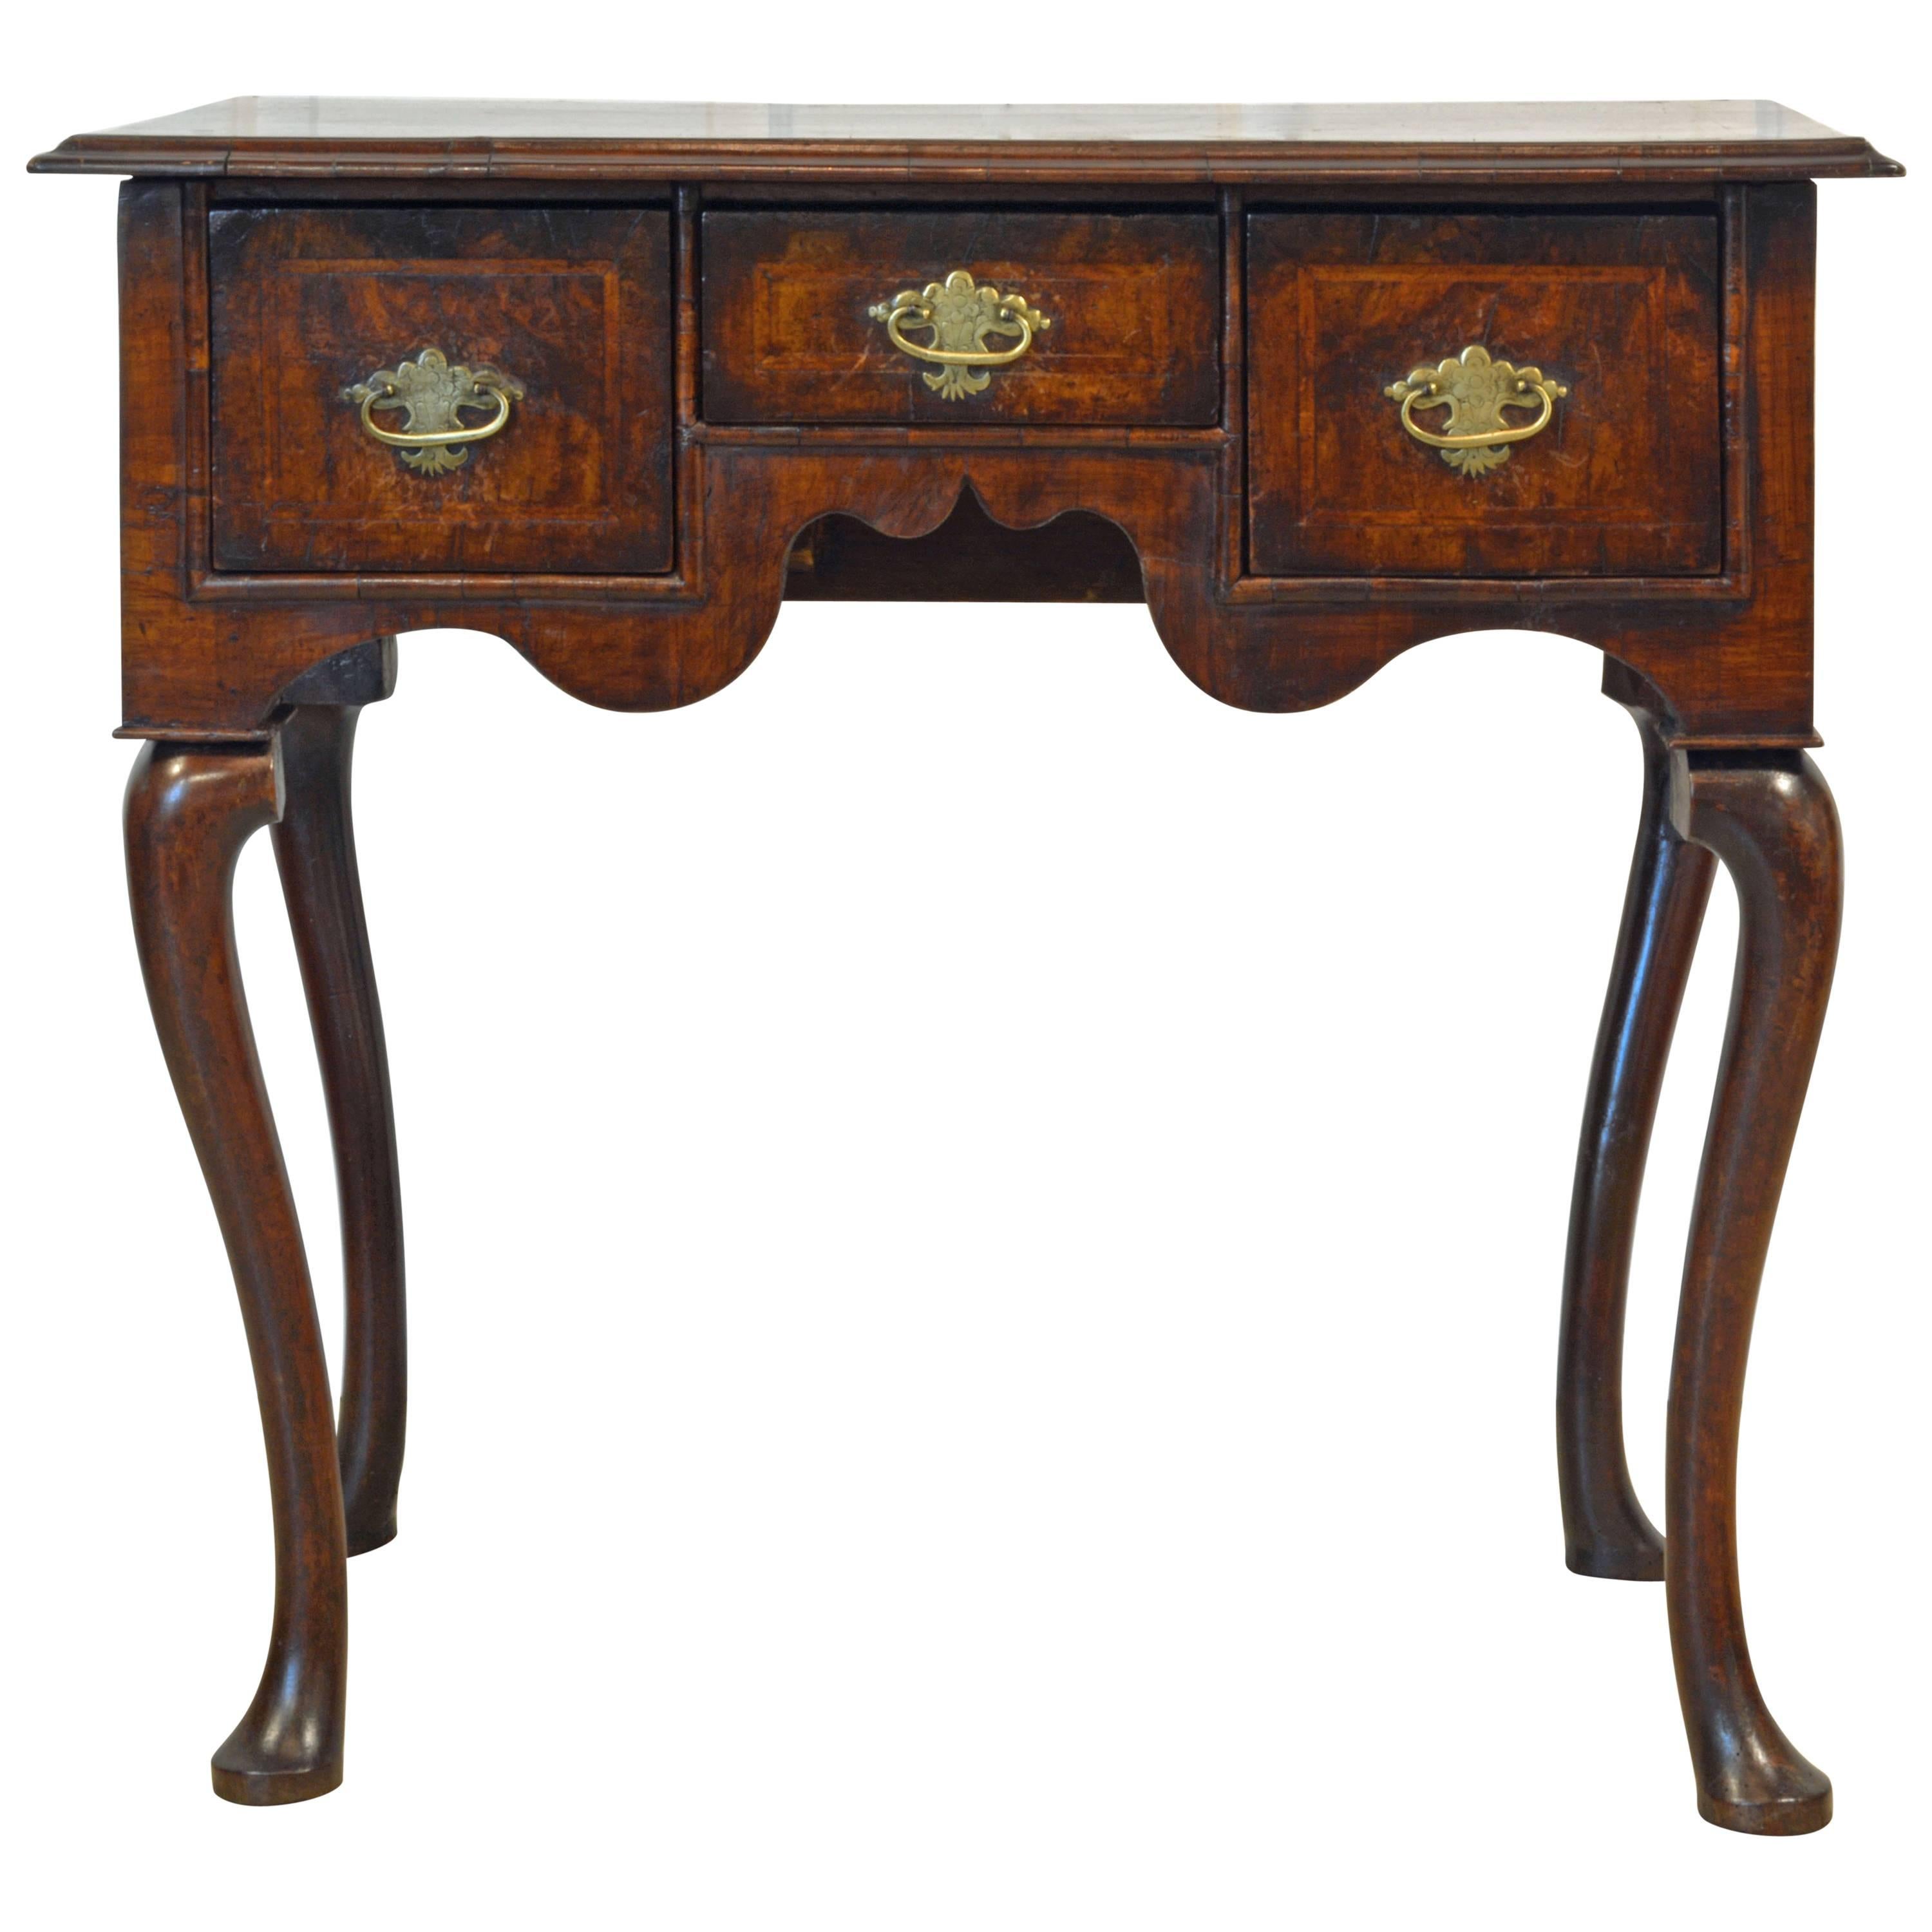 Lovely 18th Century English Queen Anne Three-Drawer Walnut Dressing Table